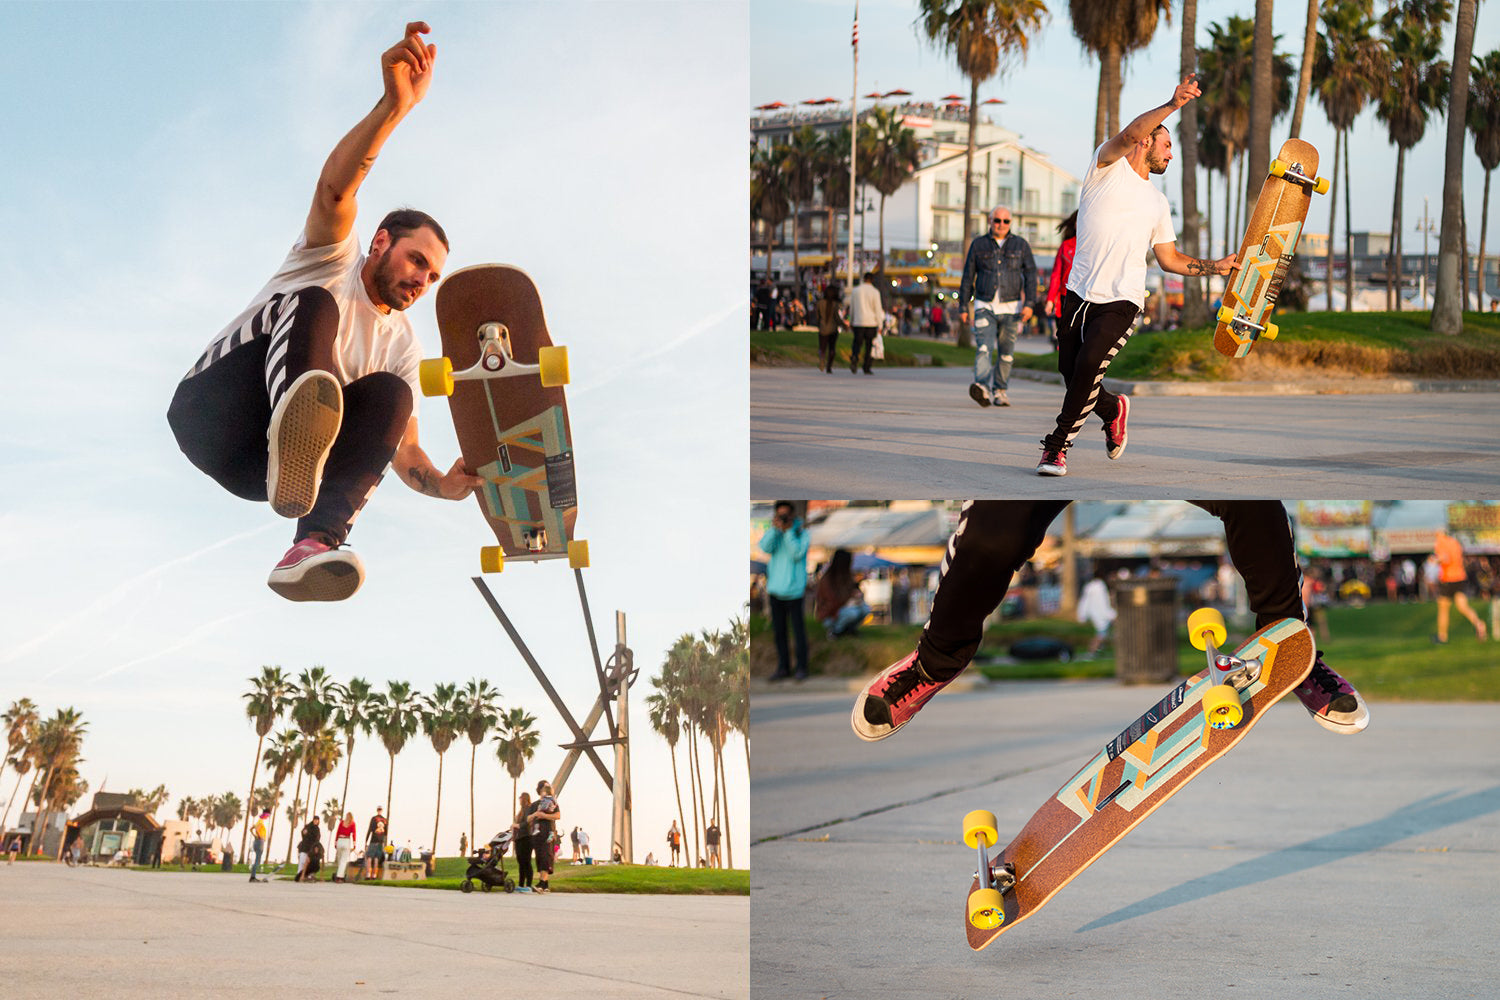 Corey Cade at Docksession Los Angeles riding the Basalt Tesseract by Loaded Boards